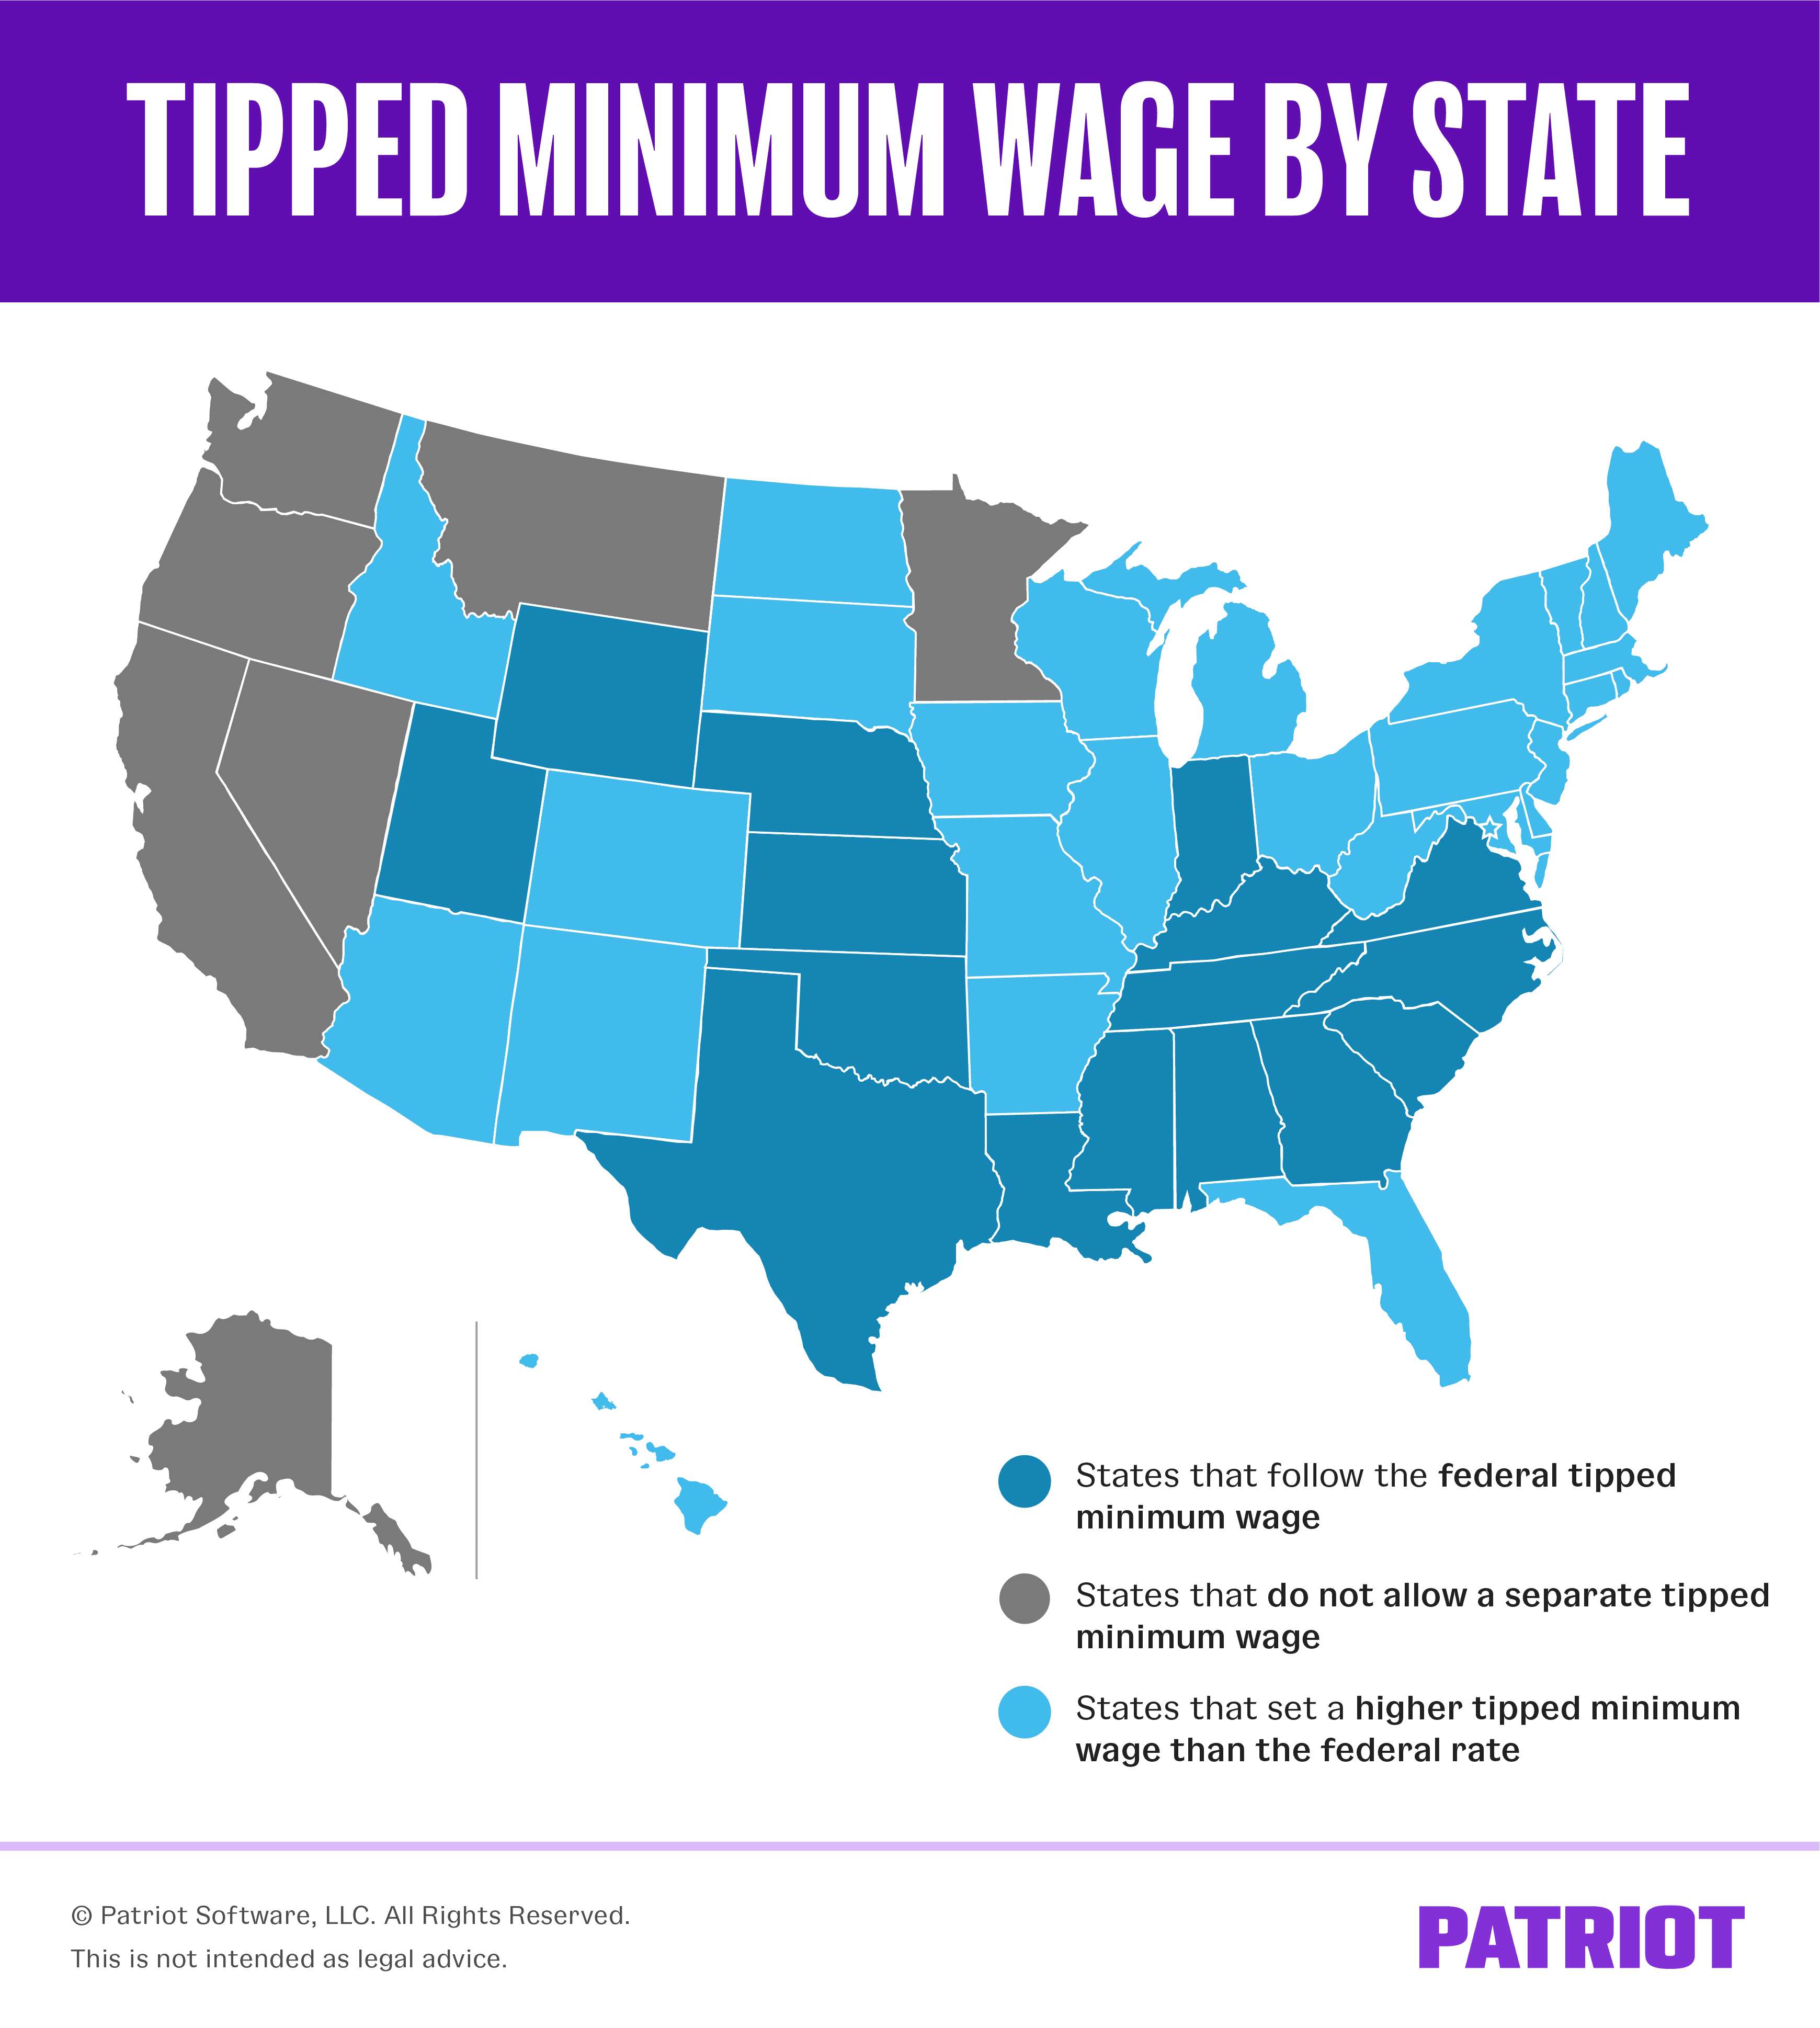 map of the United States, color coded to show states that follow the federal tipped minimum wage, states that don't allow a tipped minimum wage, and states that set their own tipped minimum wage